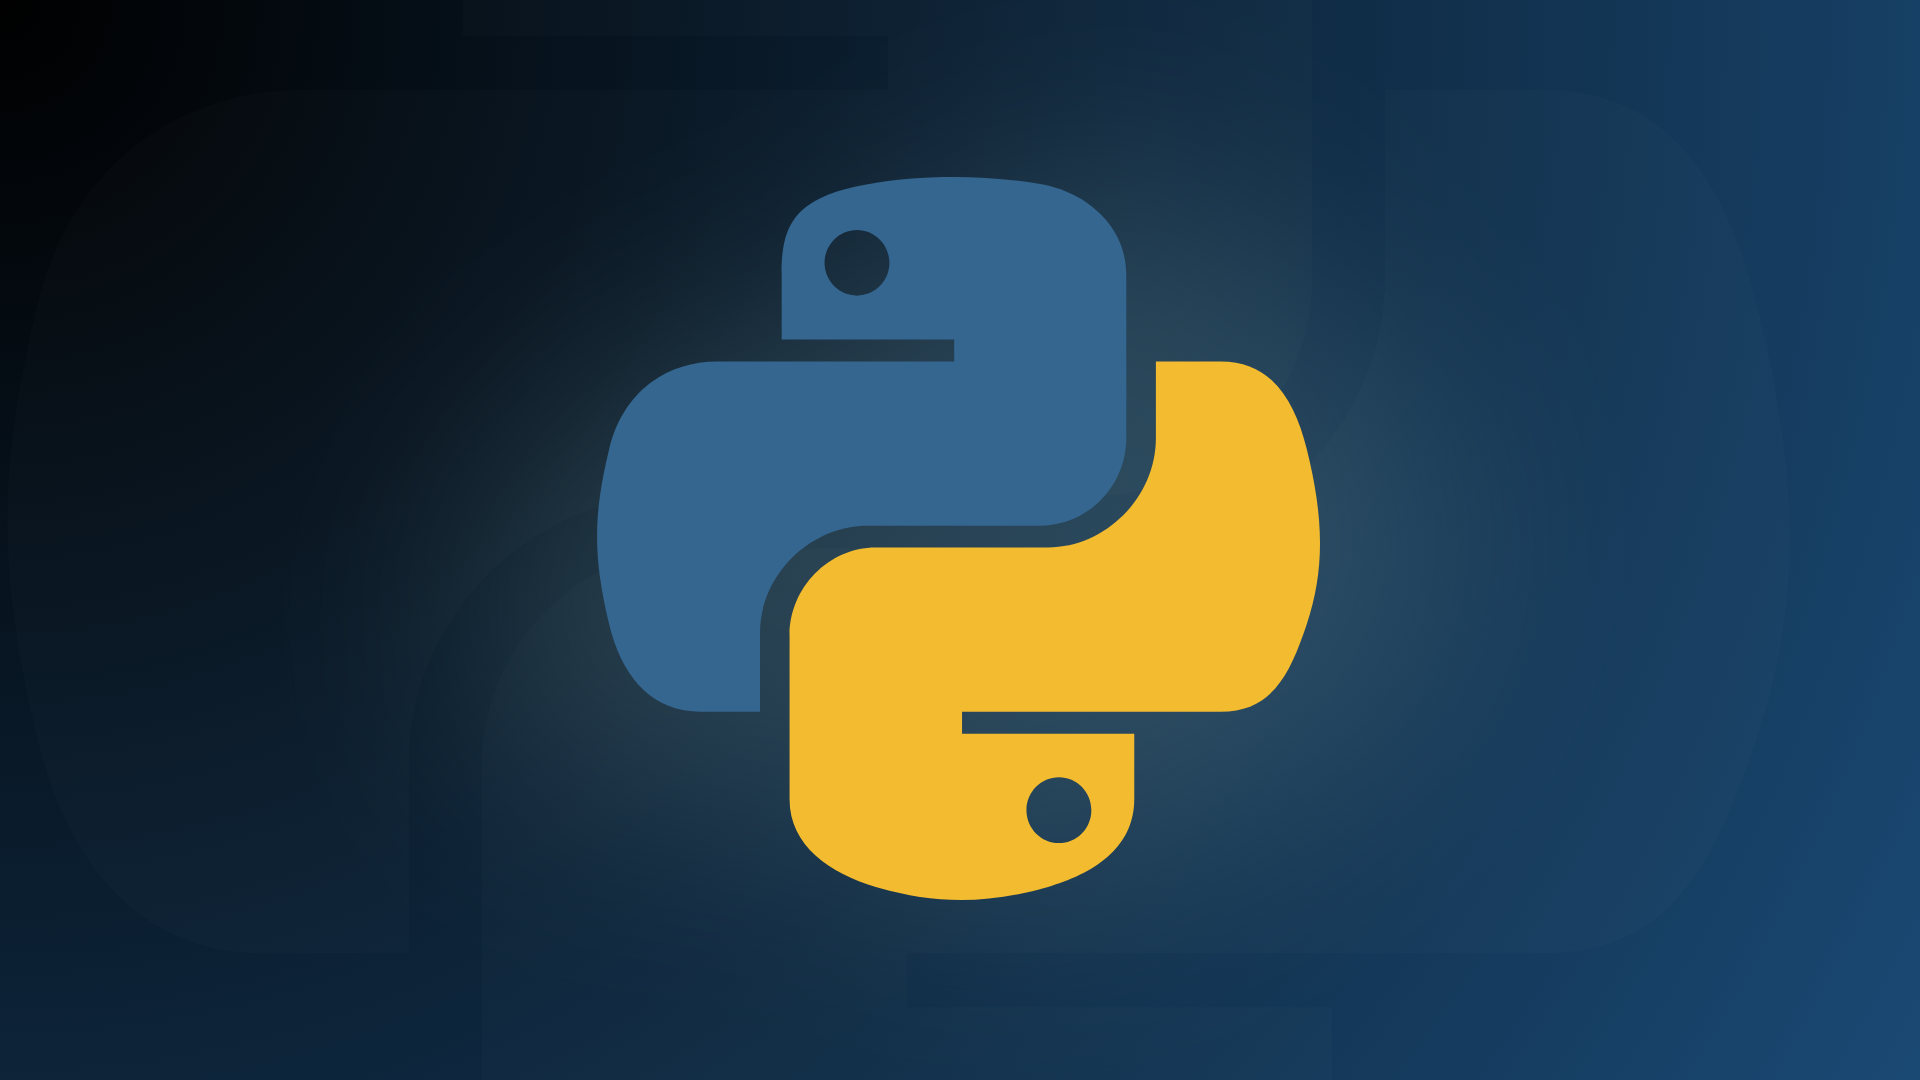 Getting Started with Python | Amigoscode